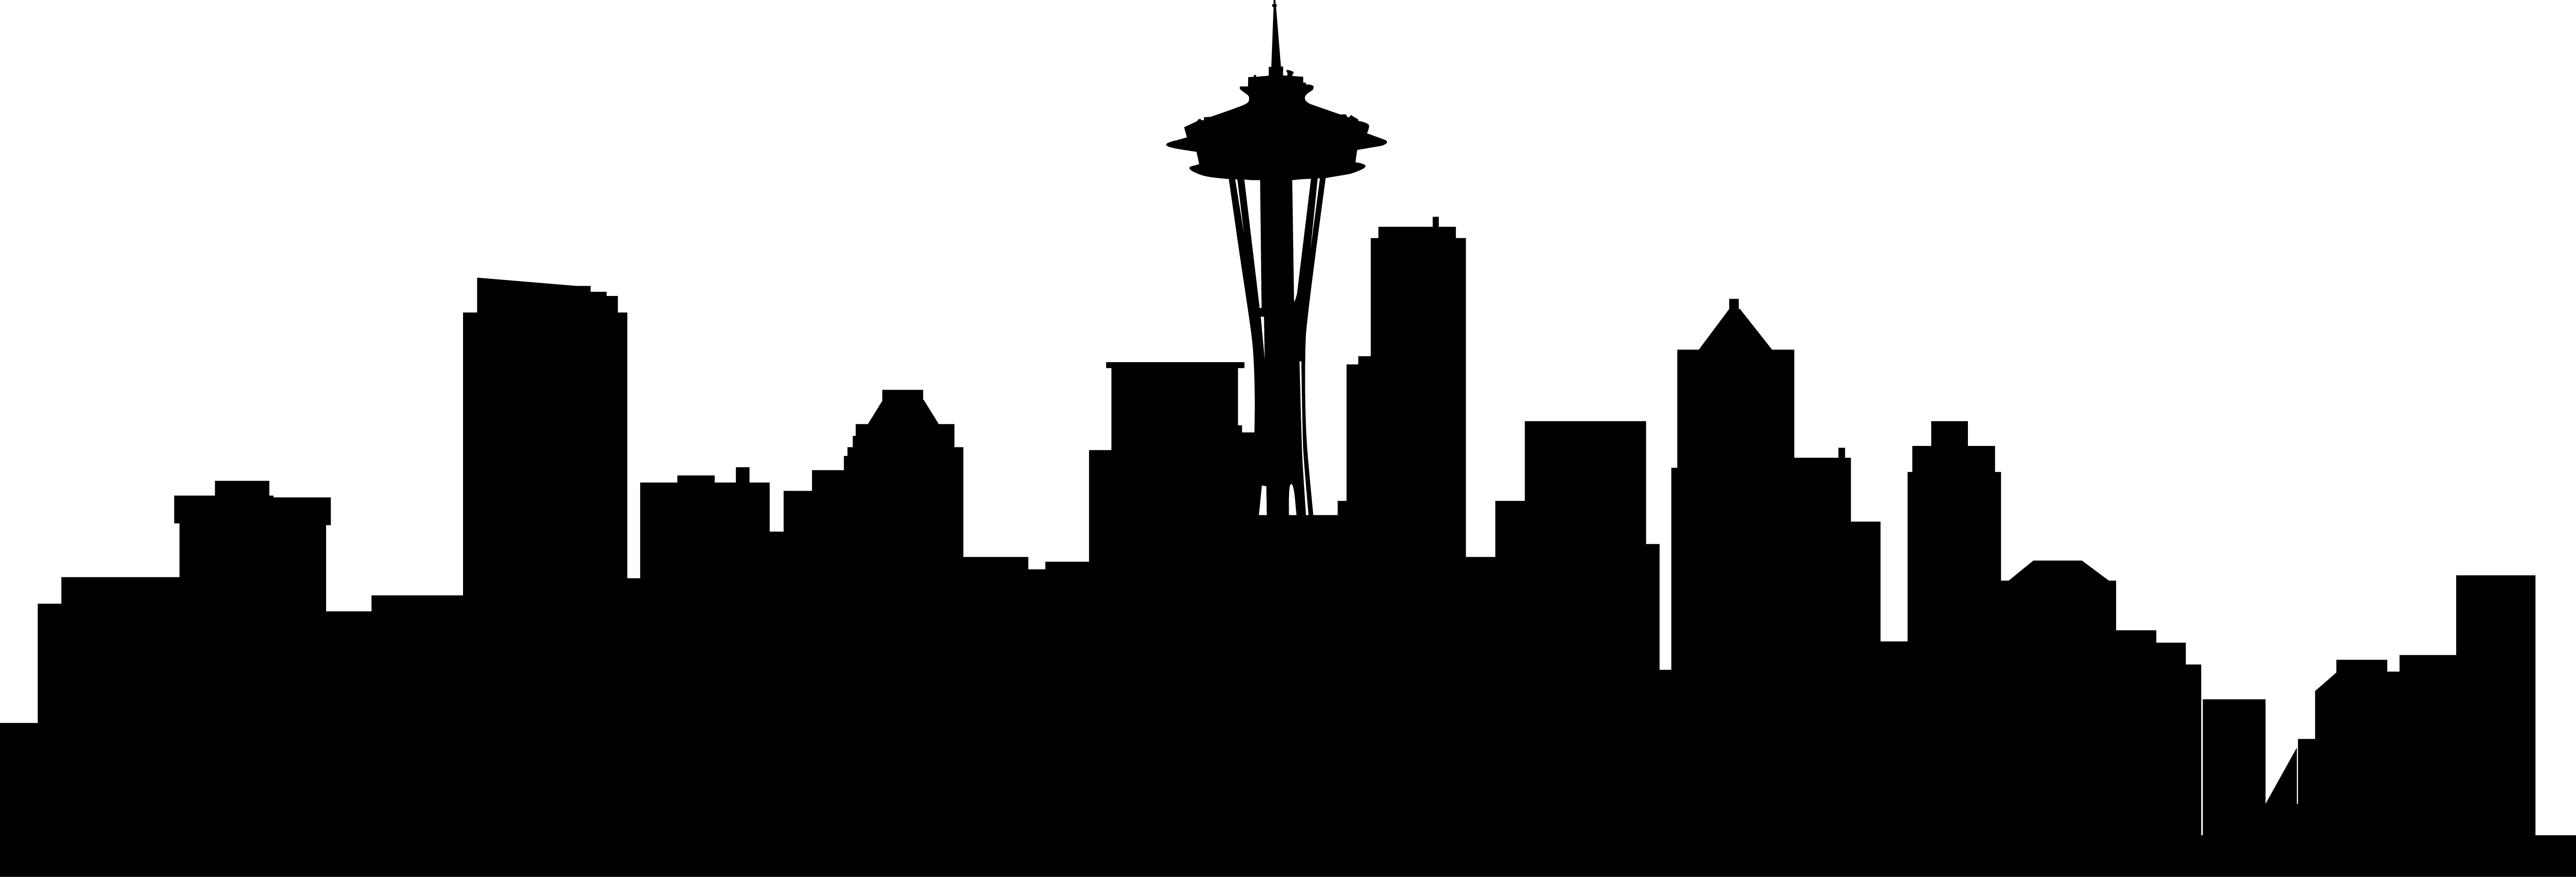 city skyline silhouette png